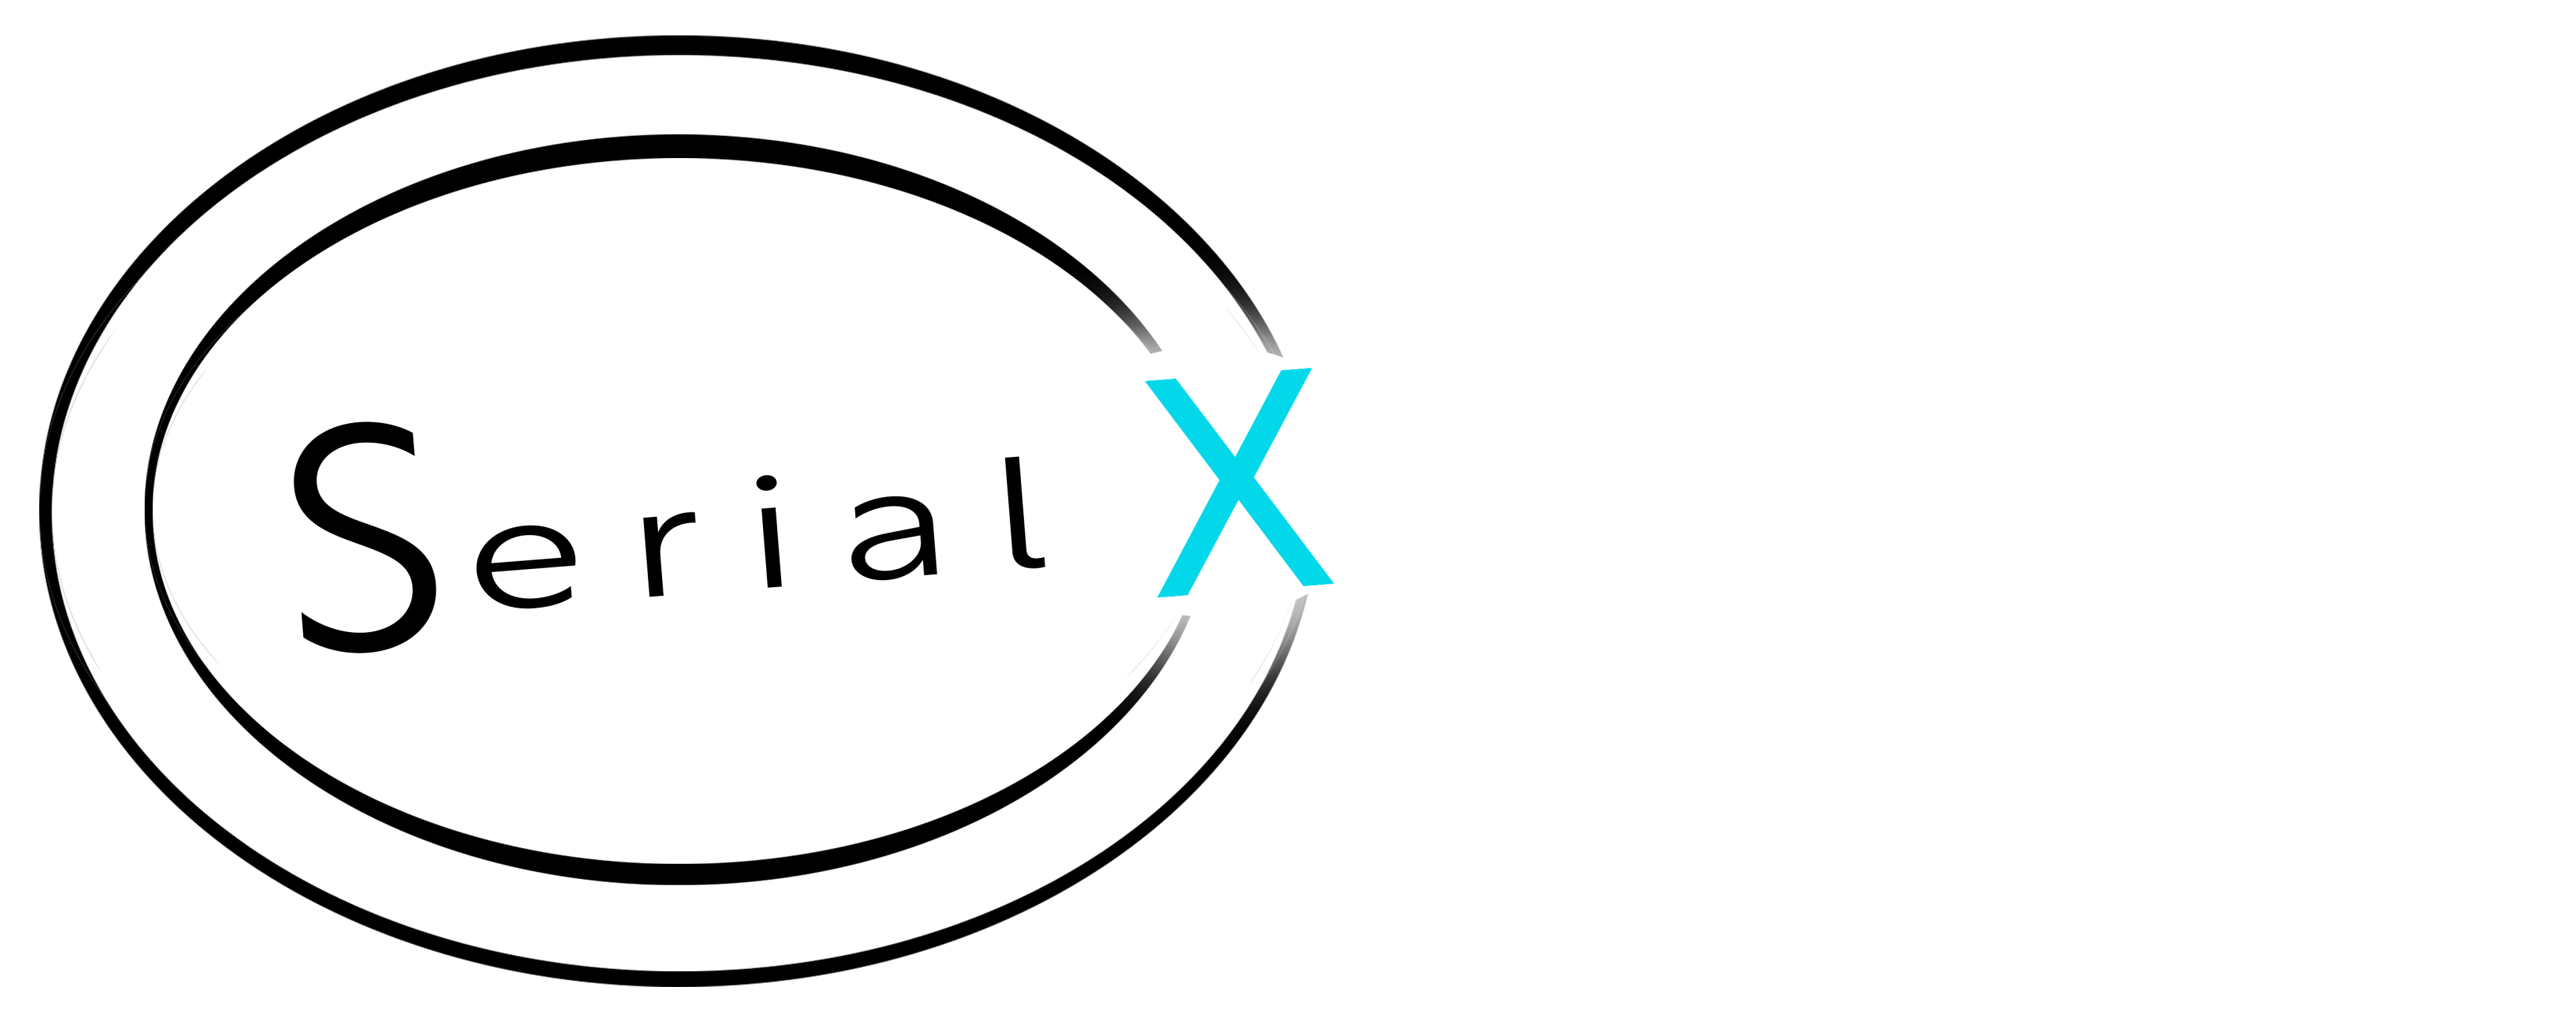 Serial X logotype on the left